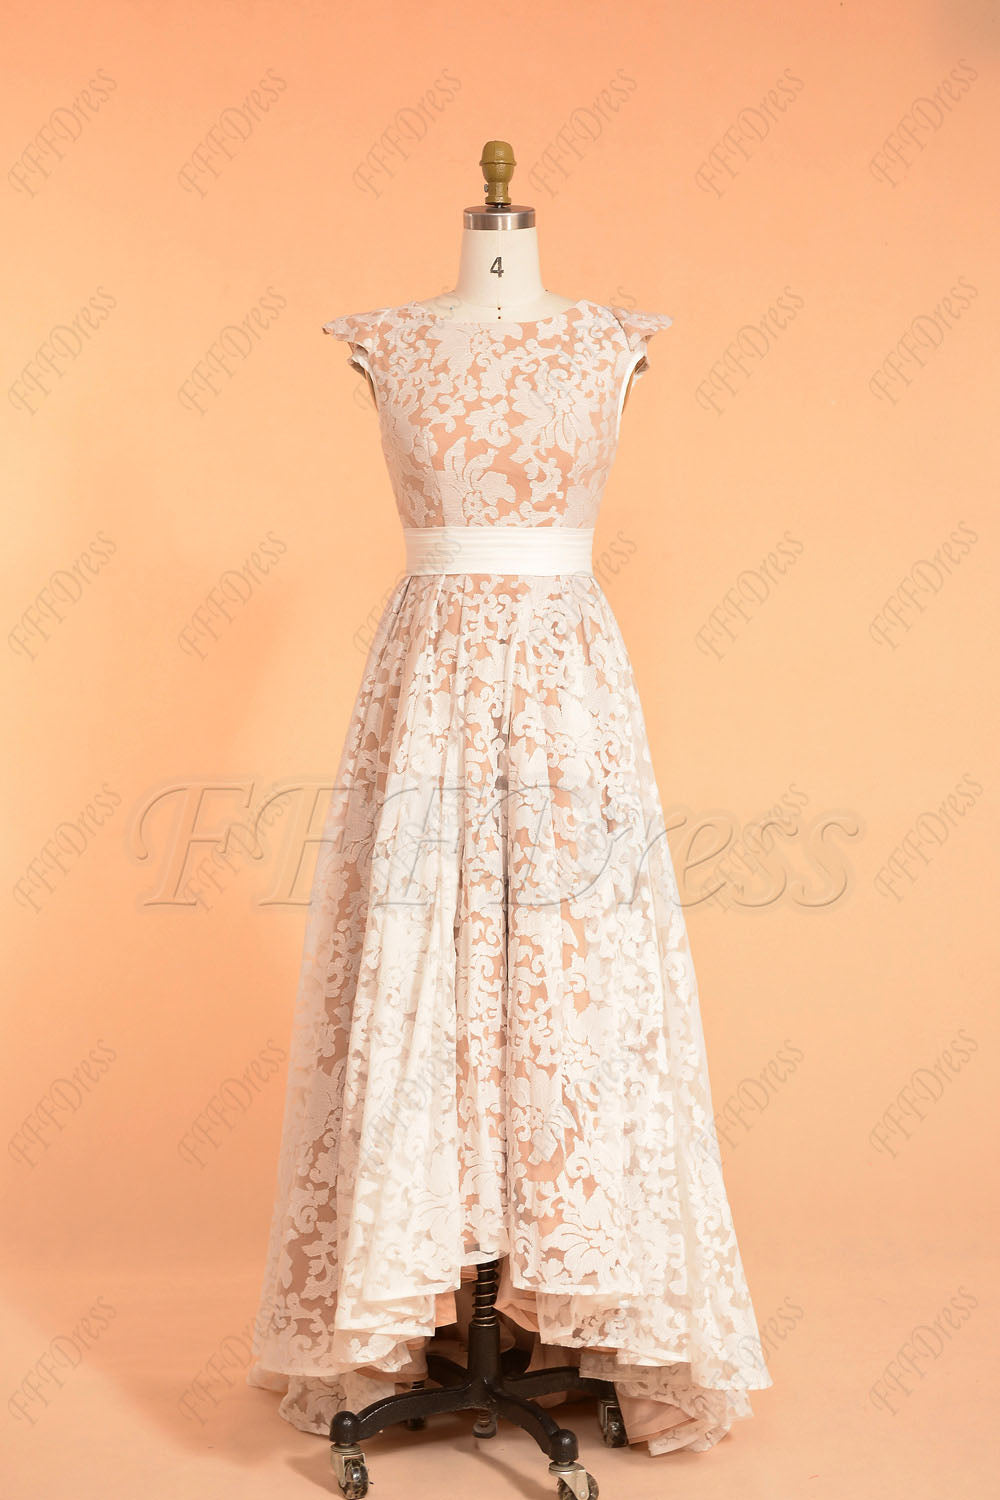 High low modest prom dresses champagne white cap sleeves